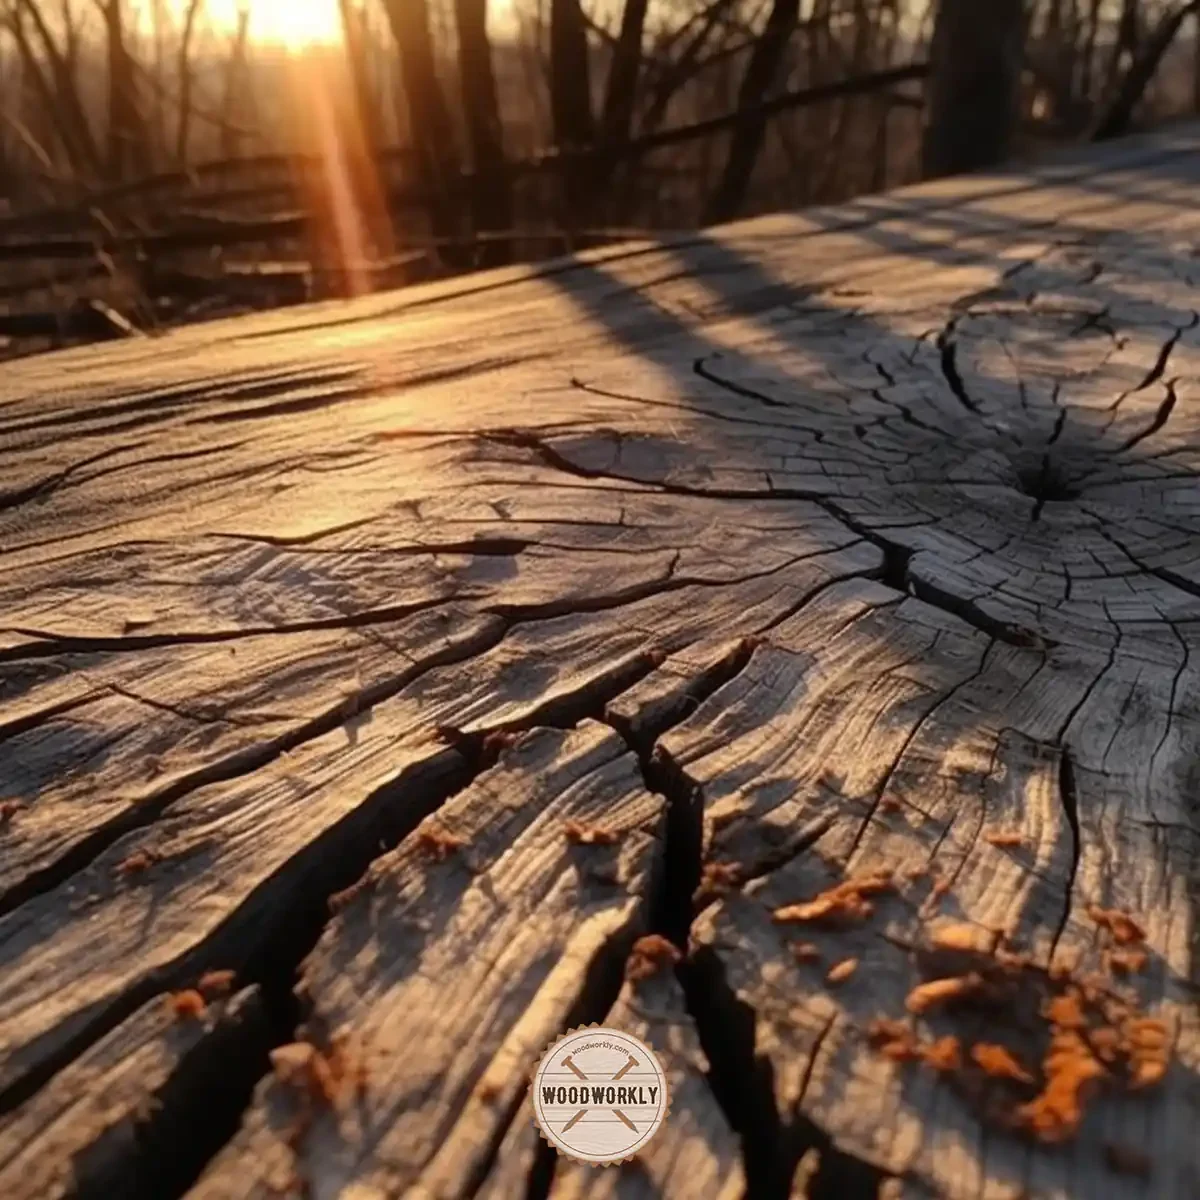 cracked wood surface due to poor drying